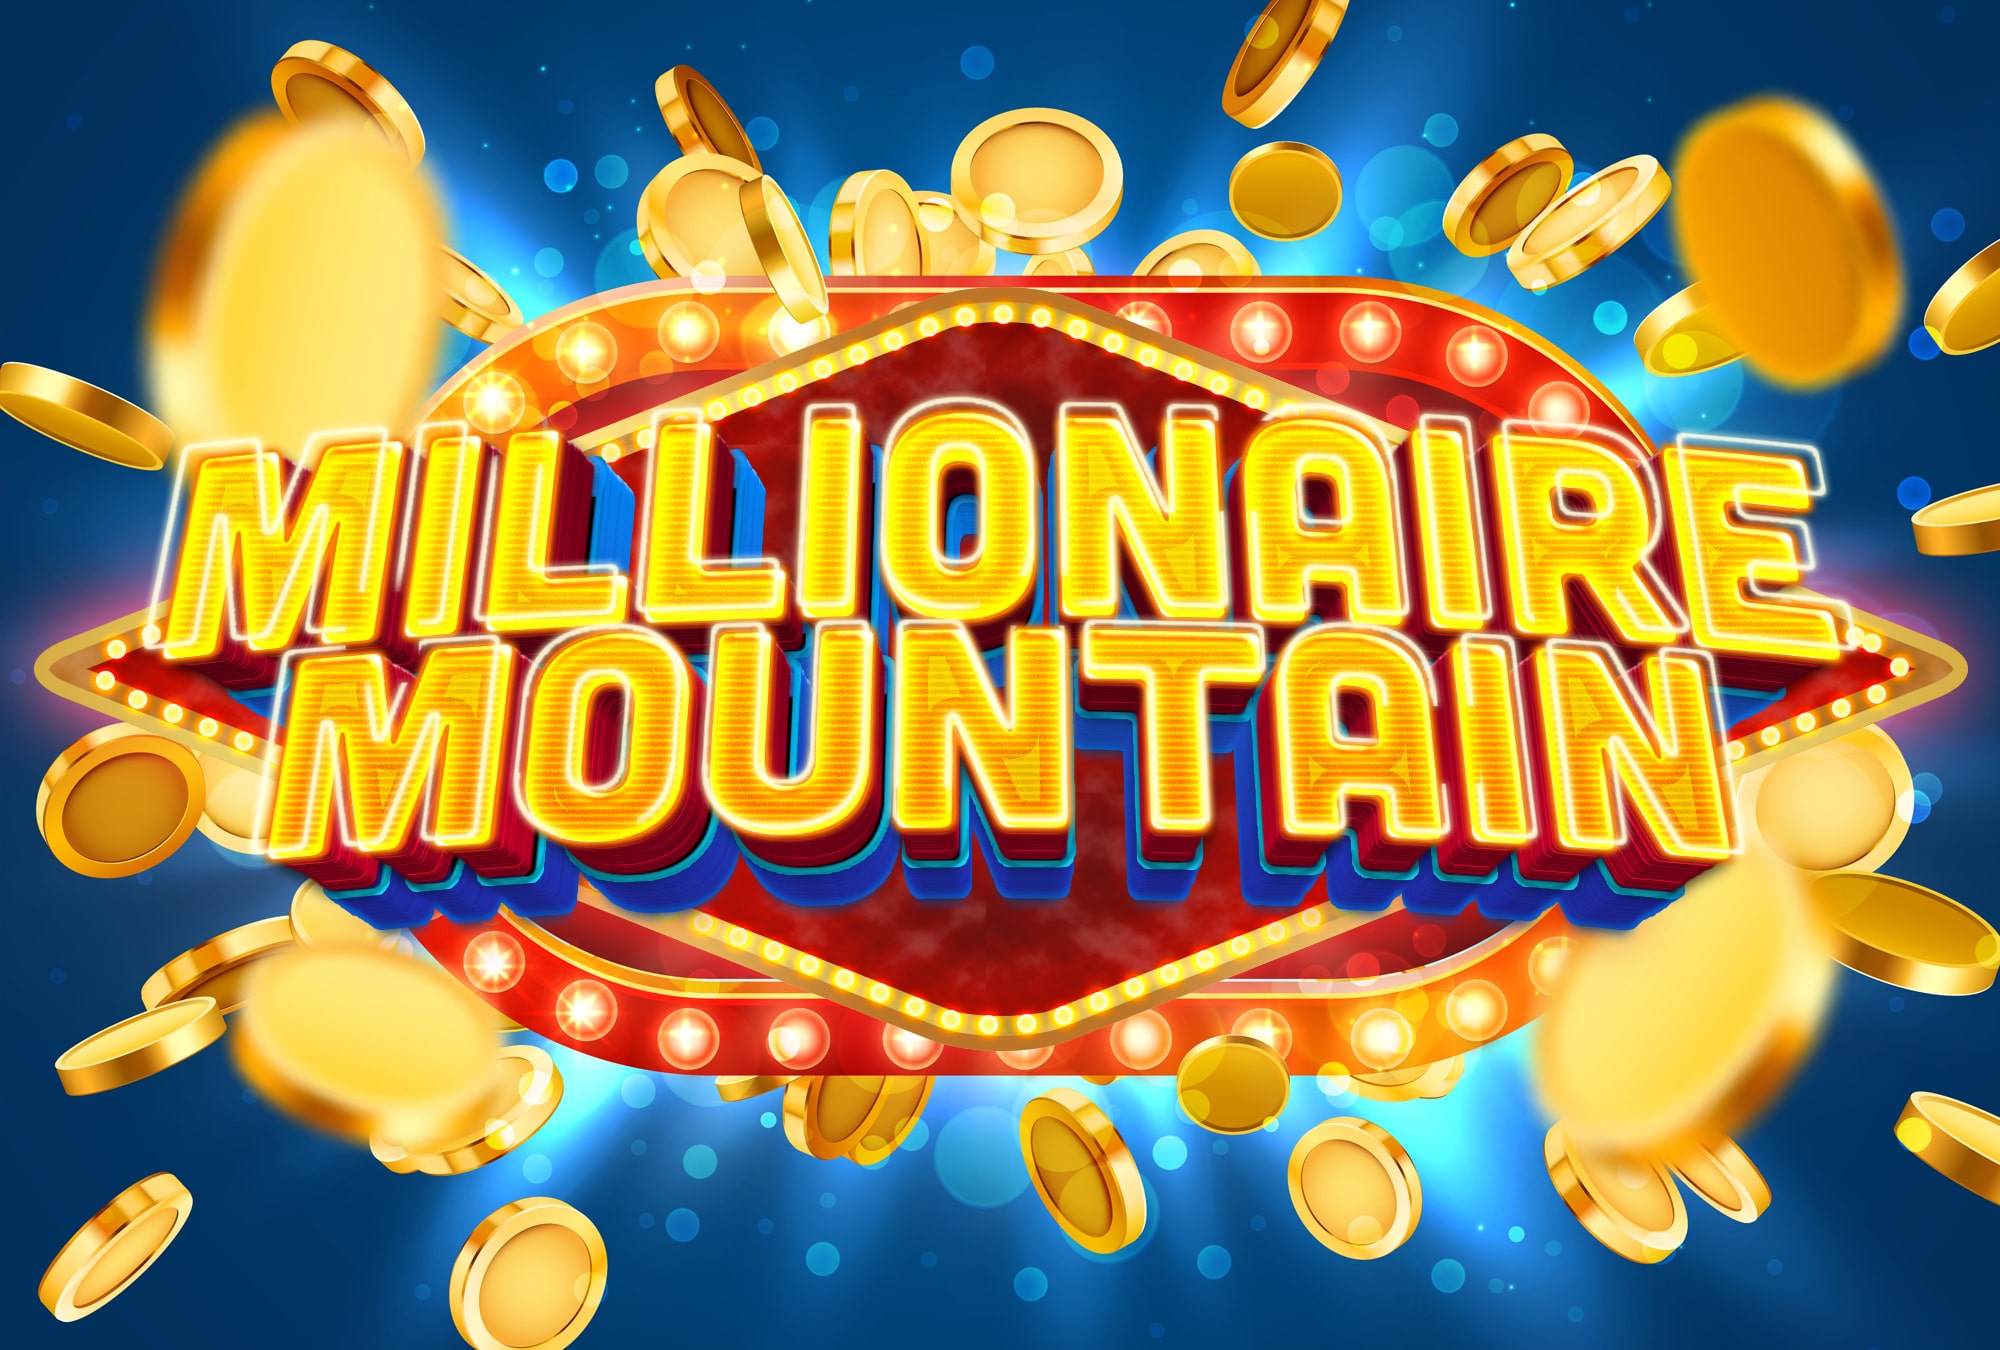 Millionaire Mountain Top 29% Outstanding Screenplays TV Pilot Competition